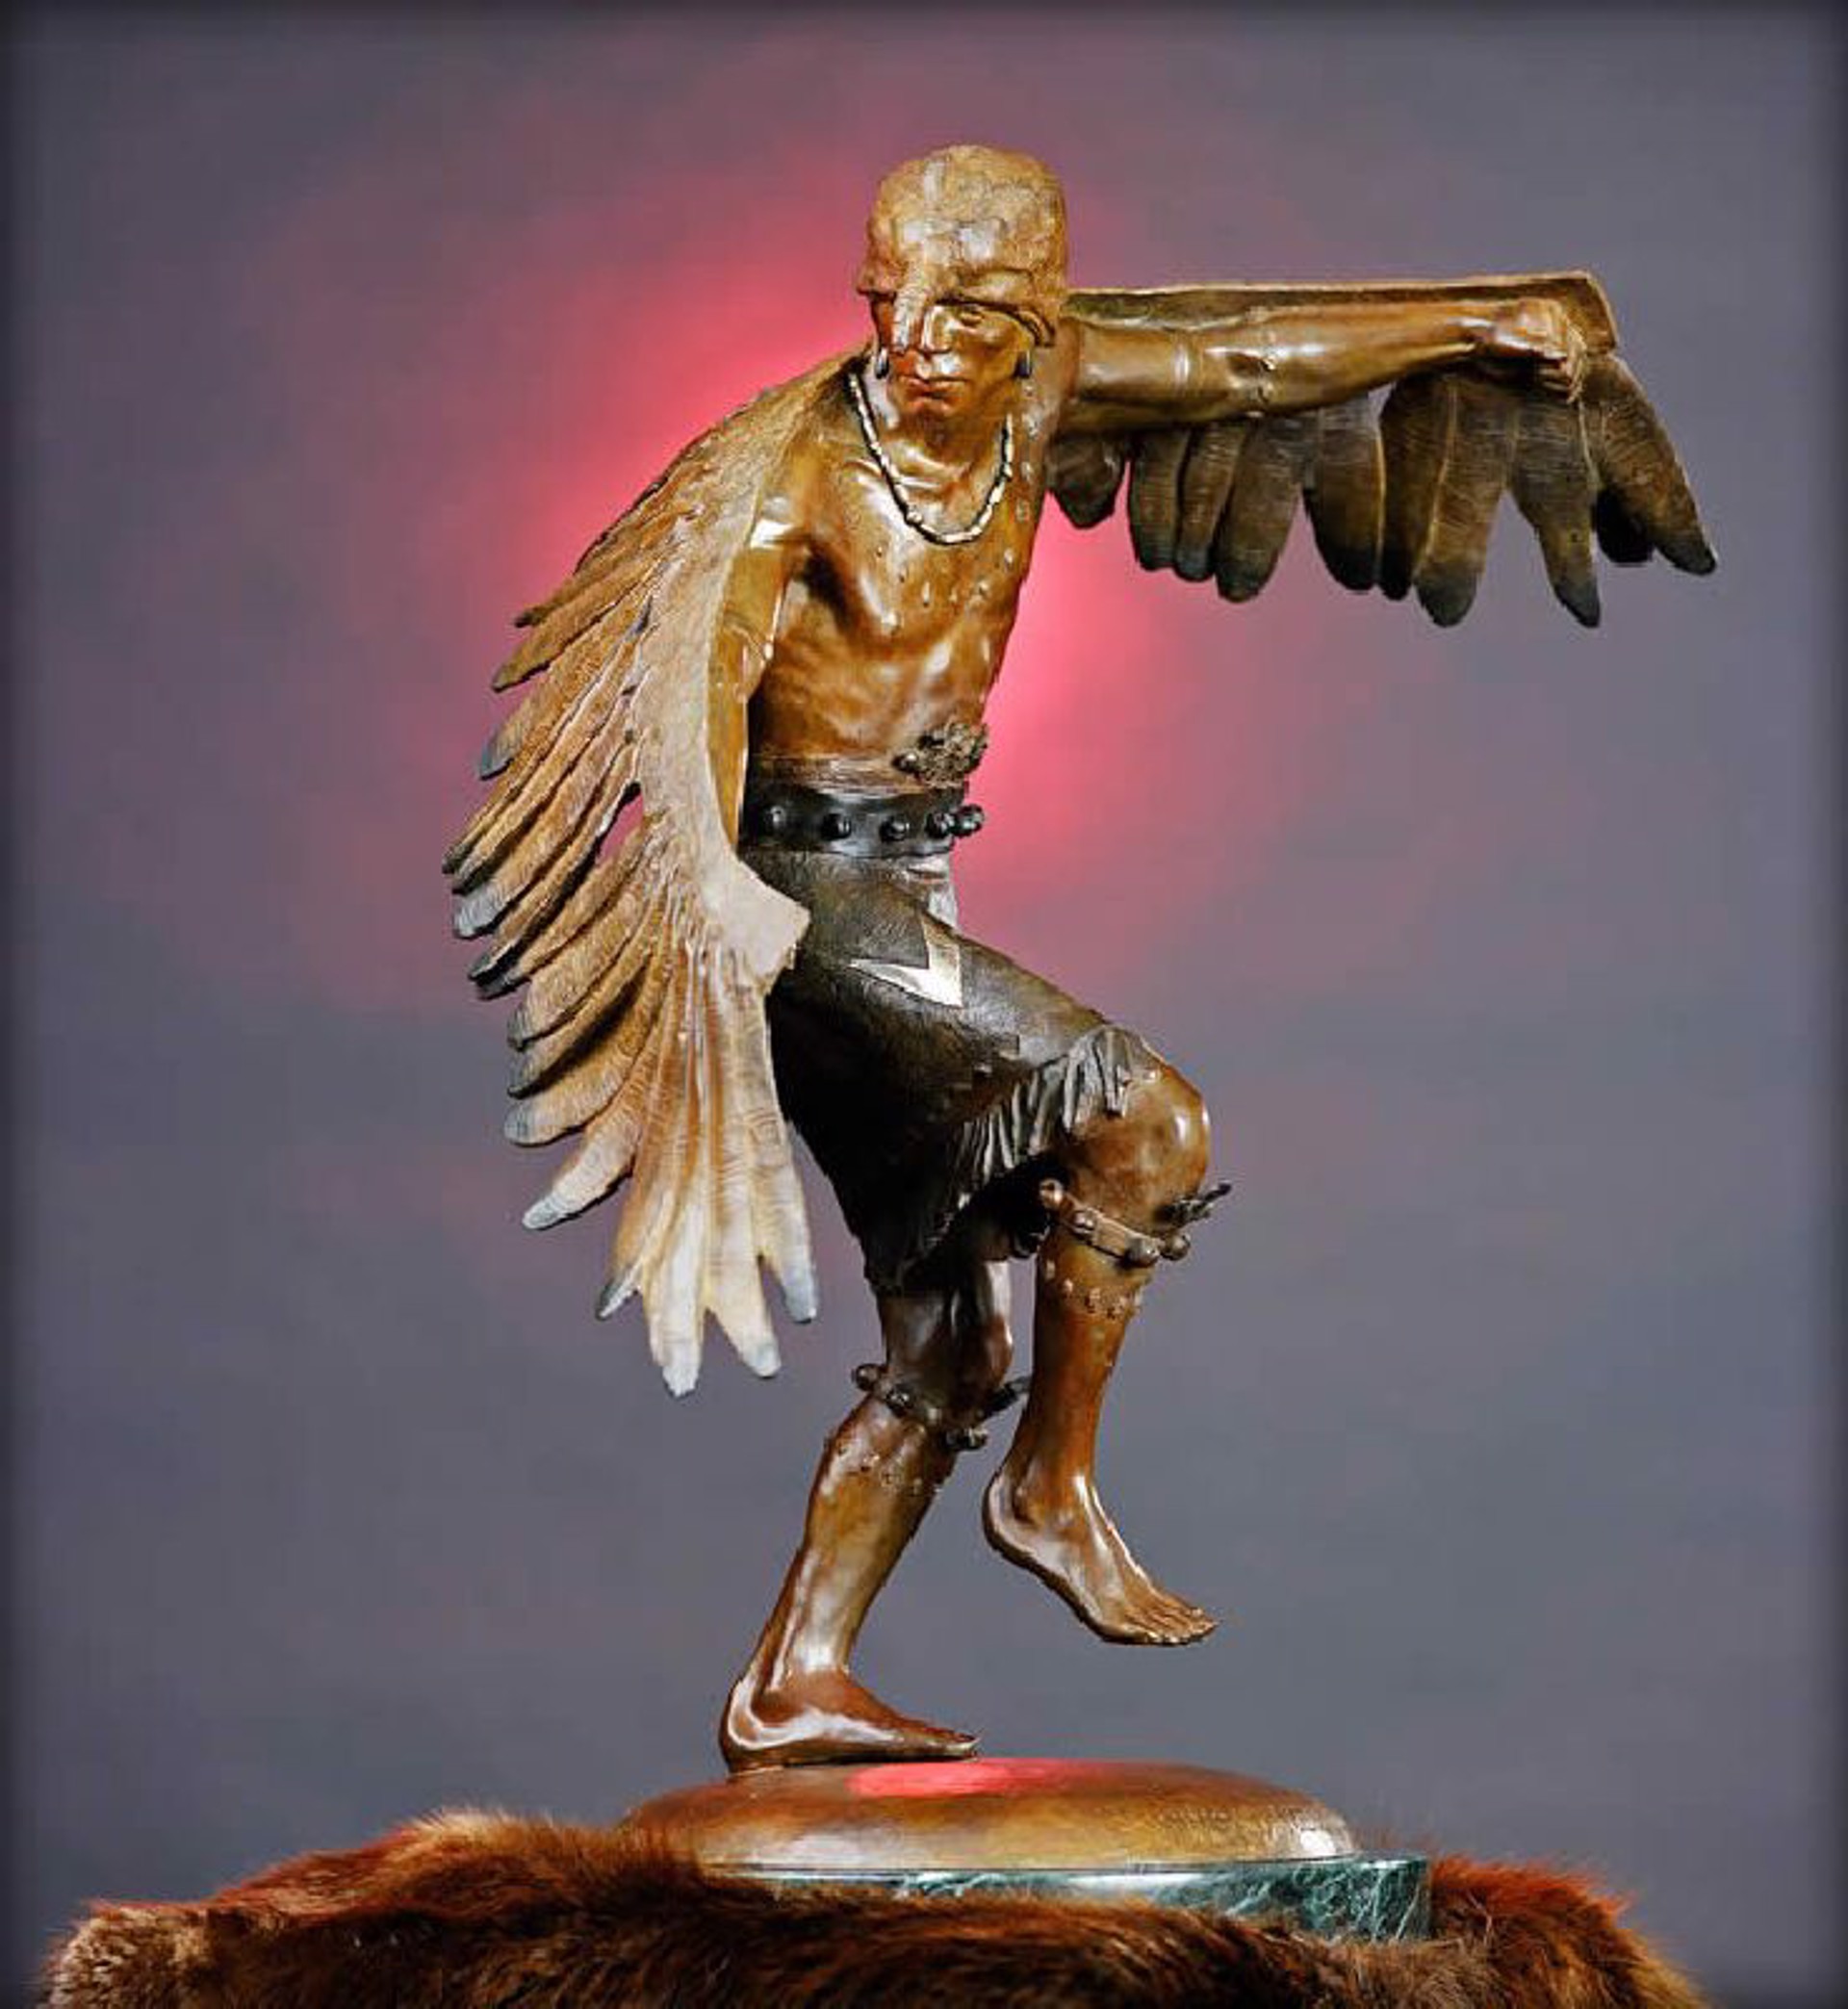 Winged Messenger by Gary Lee Price (sculptor)